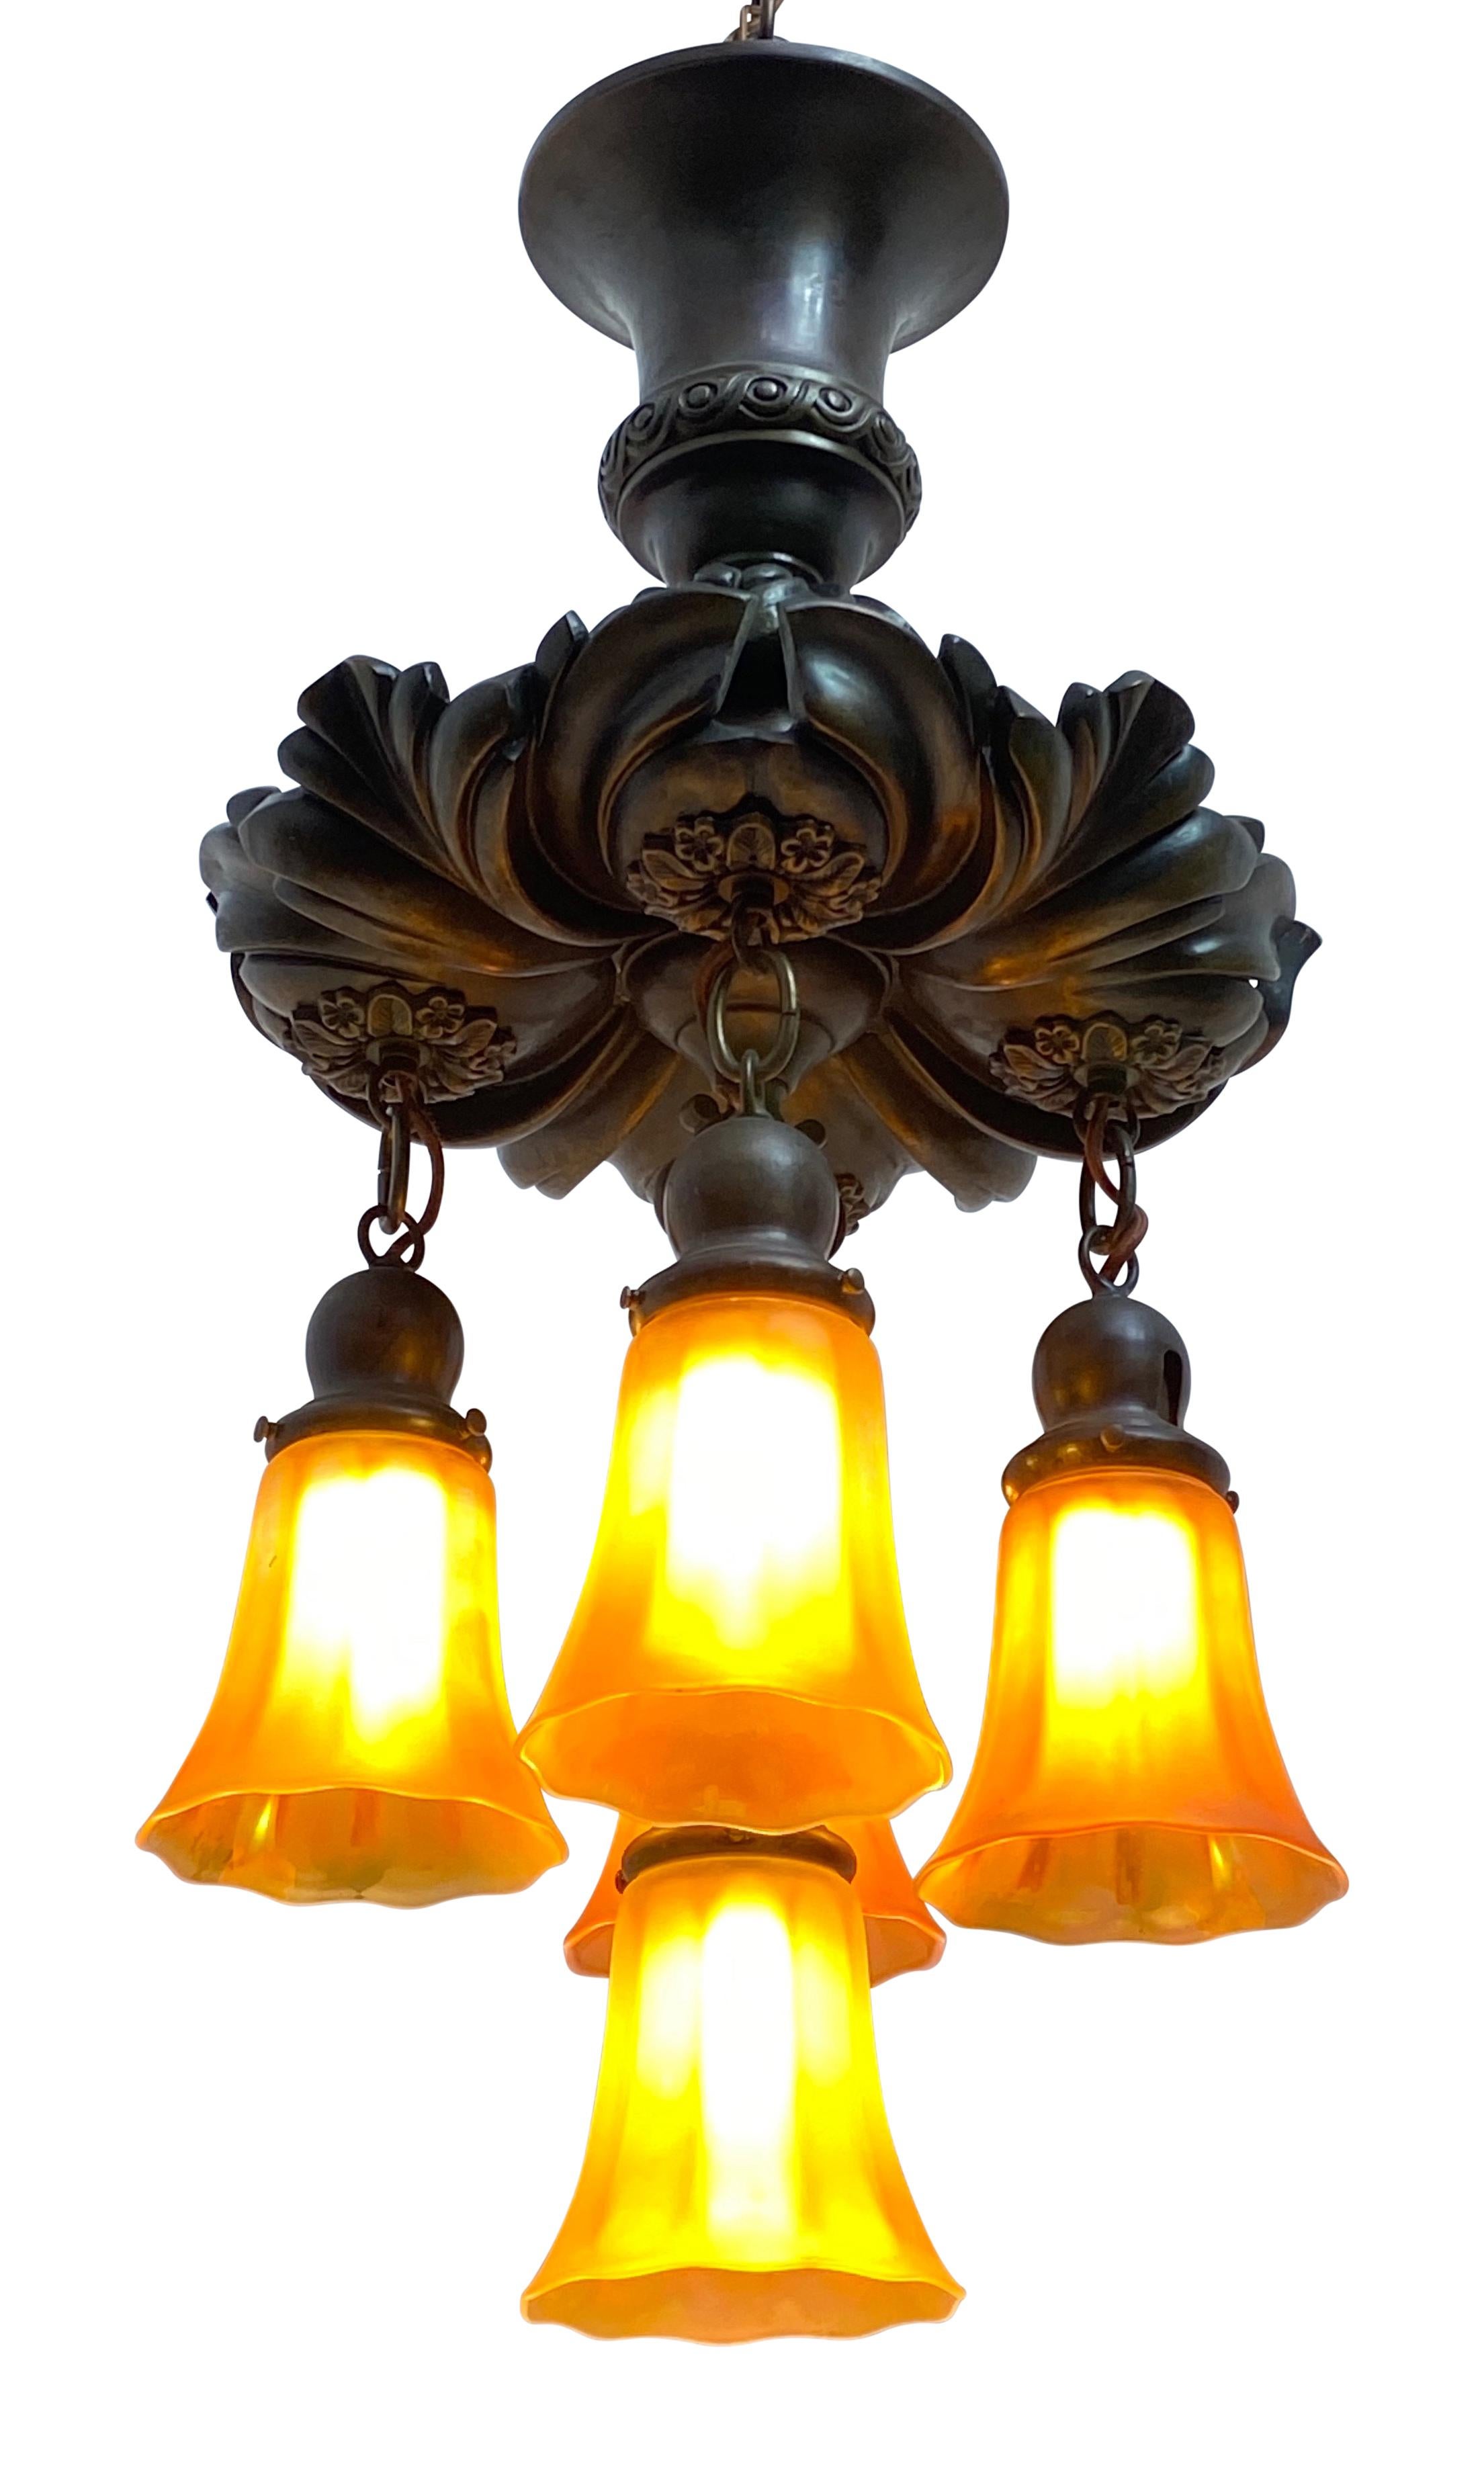 High quality cast bronze flushmount light fixture with six iridescent amber color art glass shades.
American, early 20th century, circa 1920.
Newly re-wired.